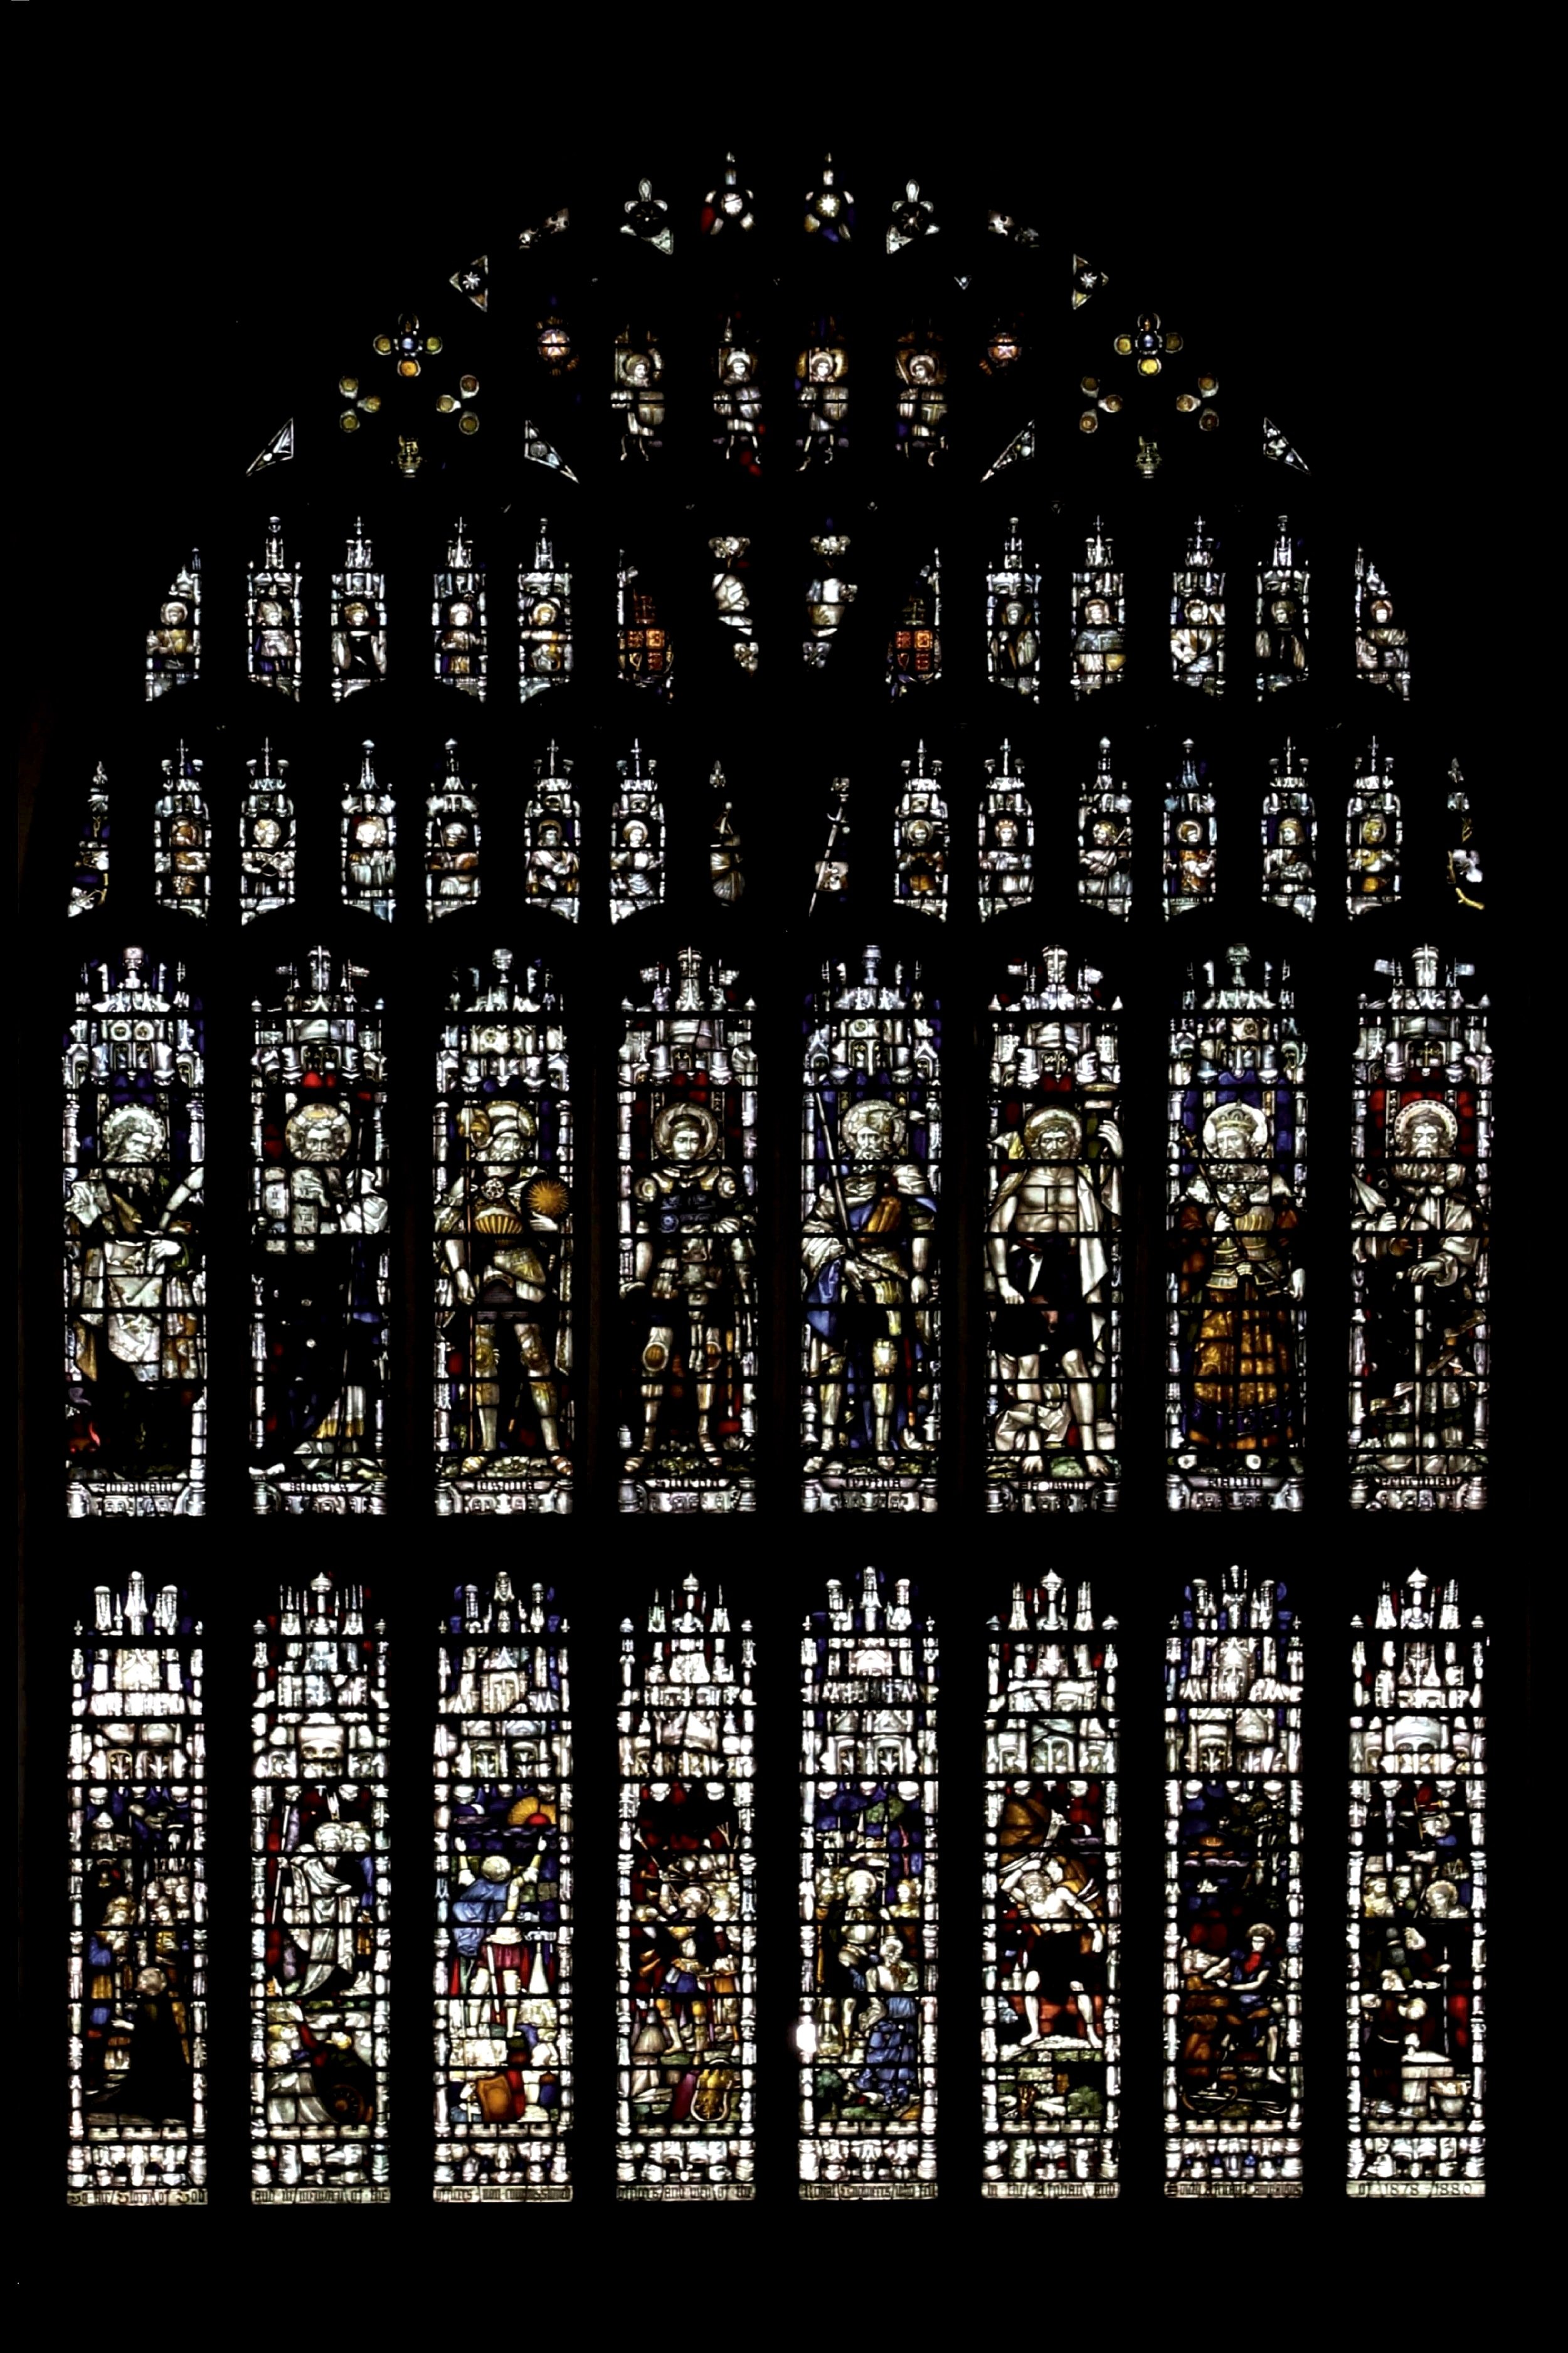 Scottish Stained GlassExploring the History and Purpose of Church Stained  Glass